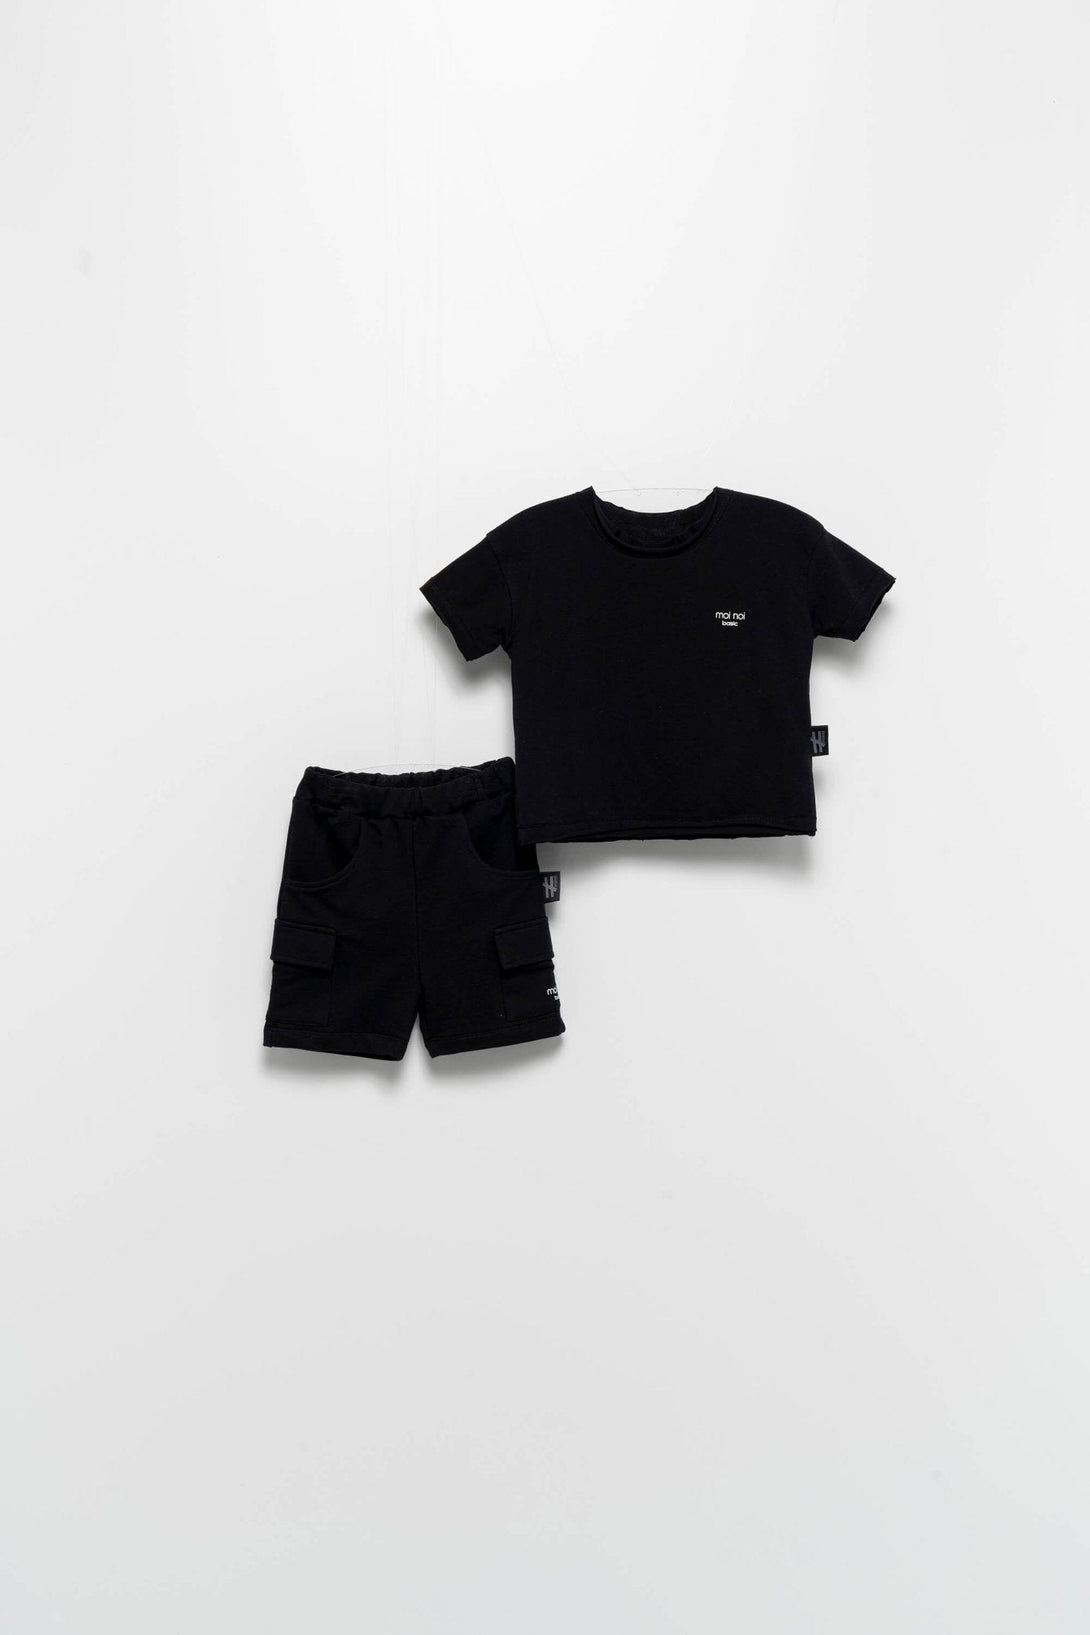 Round neck t-top paired with down pocket elastic short. - Negative Apparel